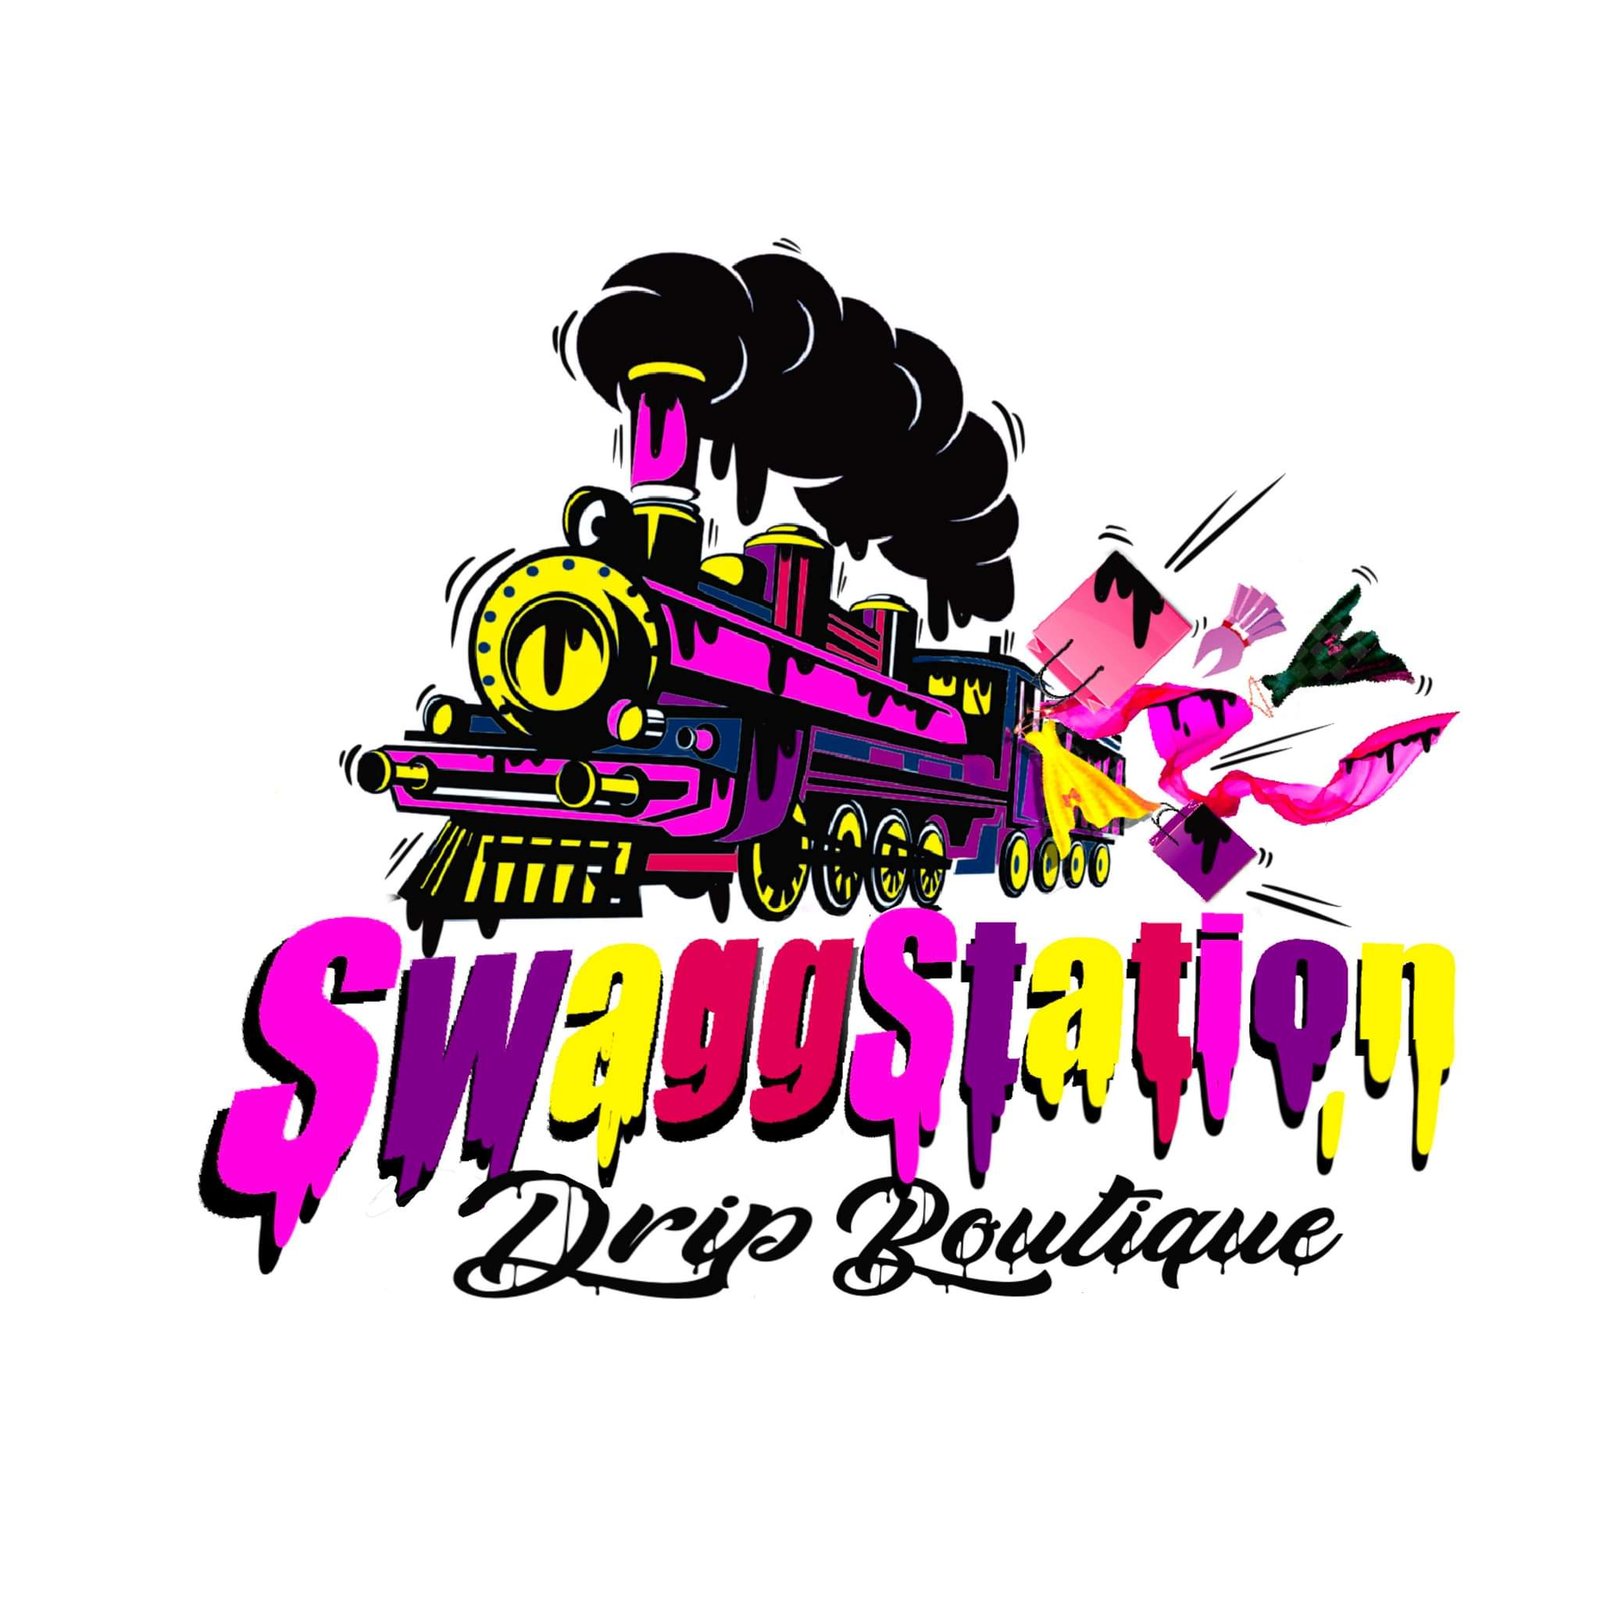 Swagg Station Drip Boutique's account image